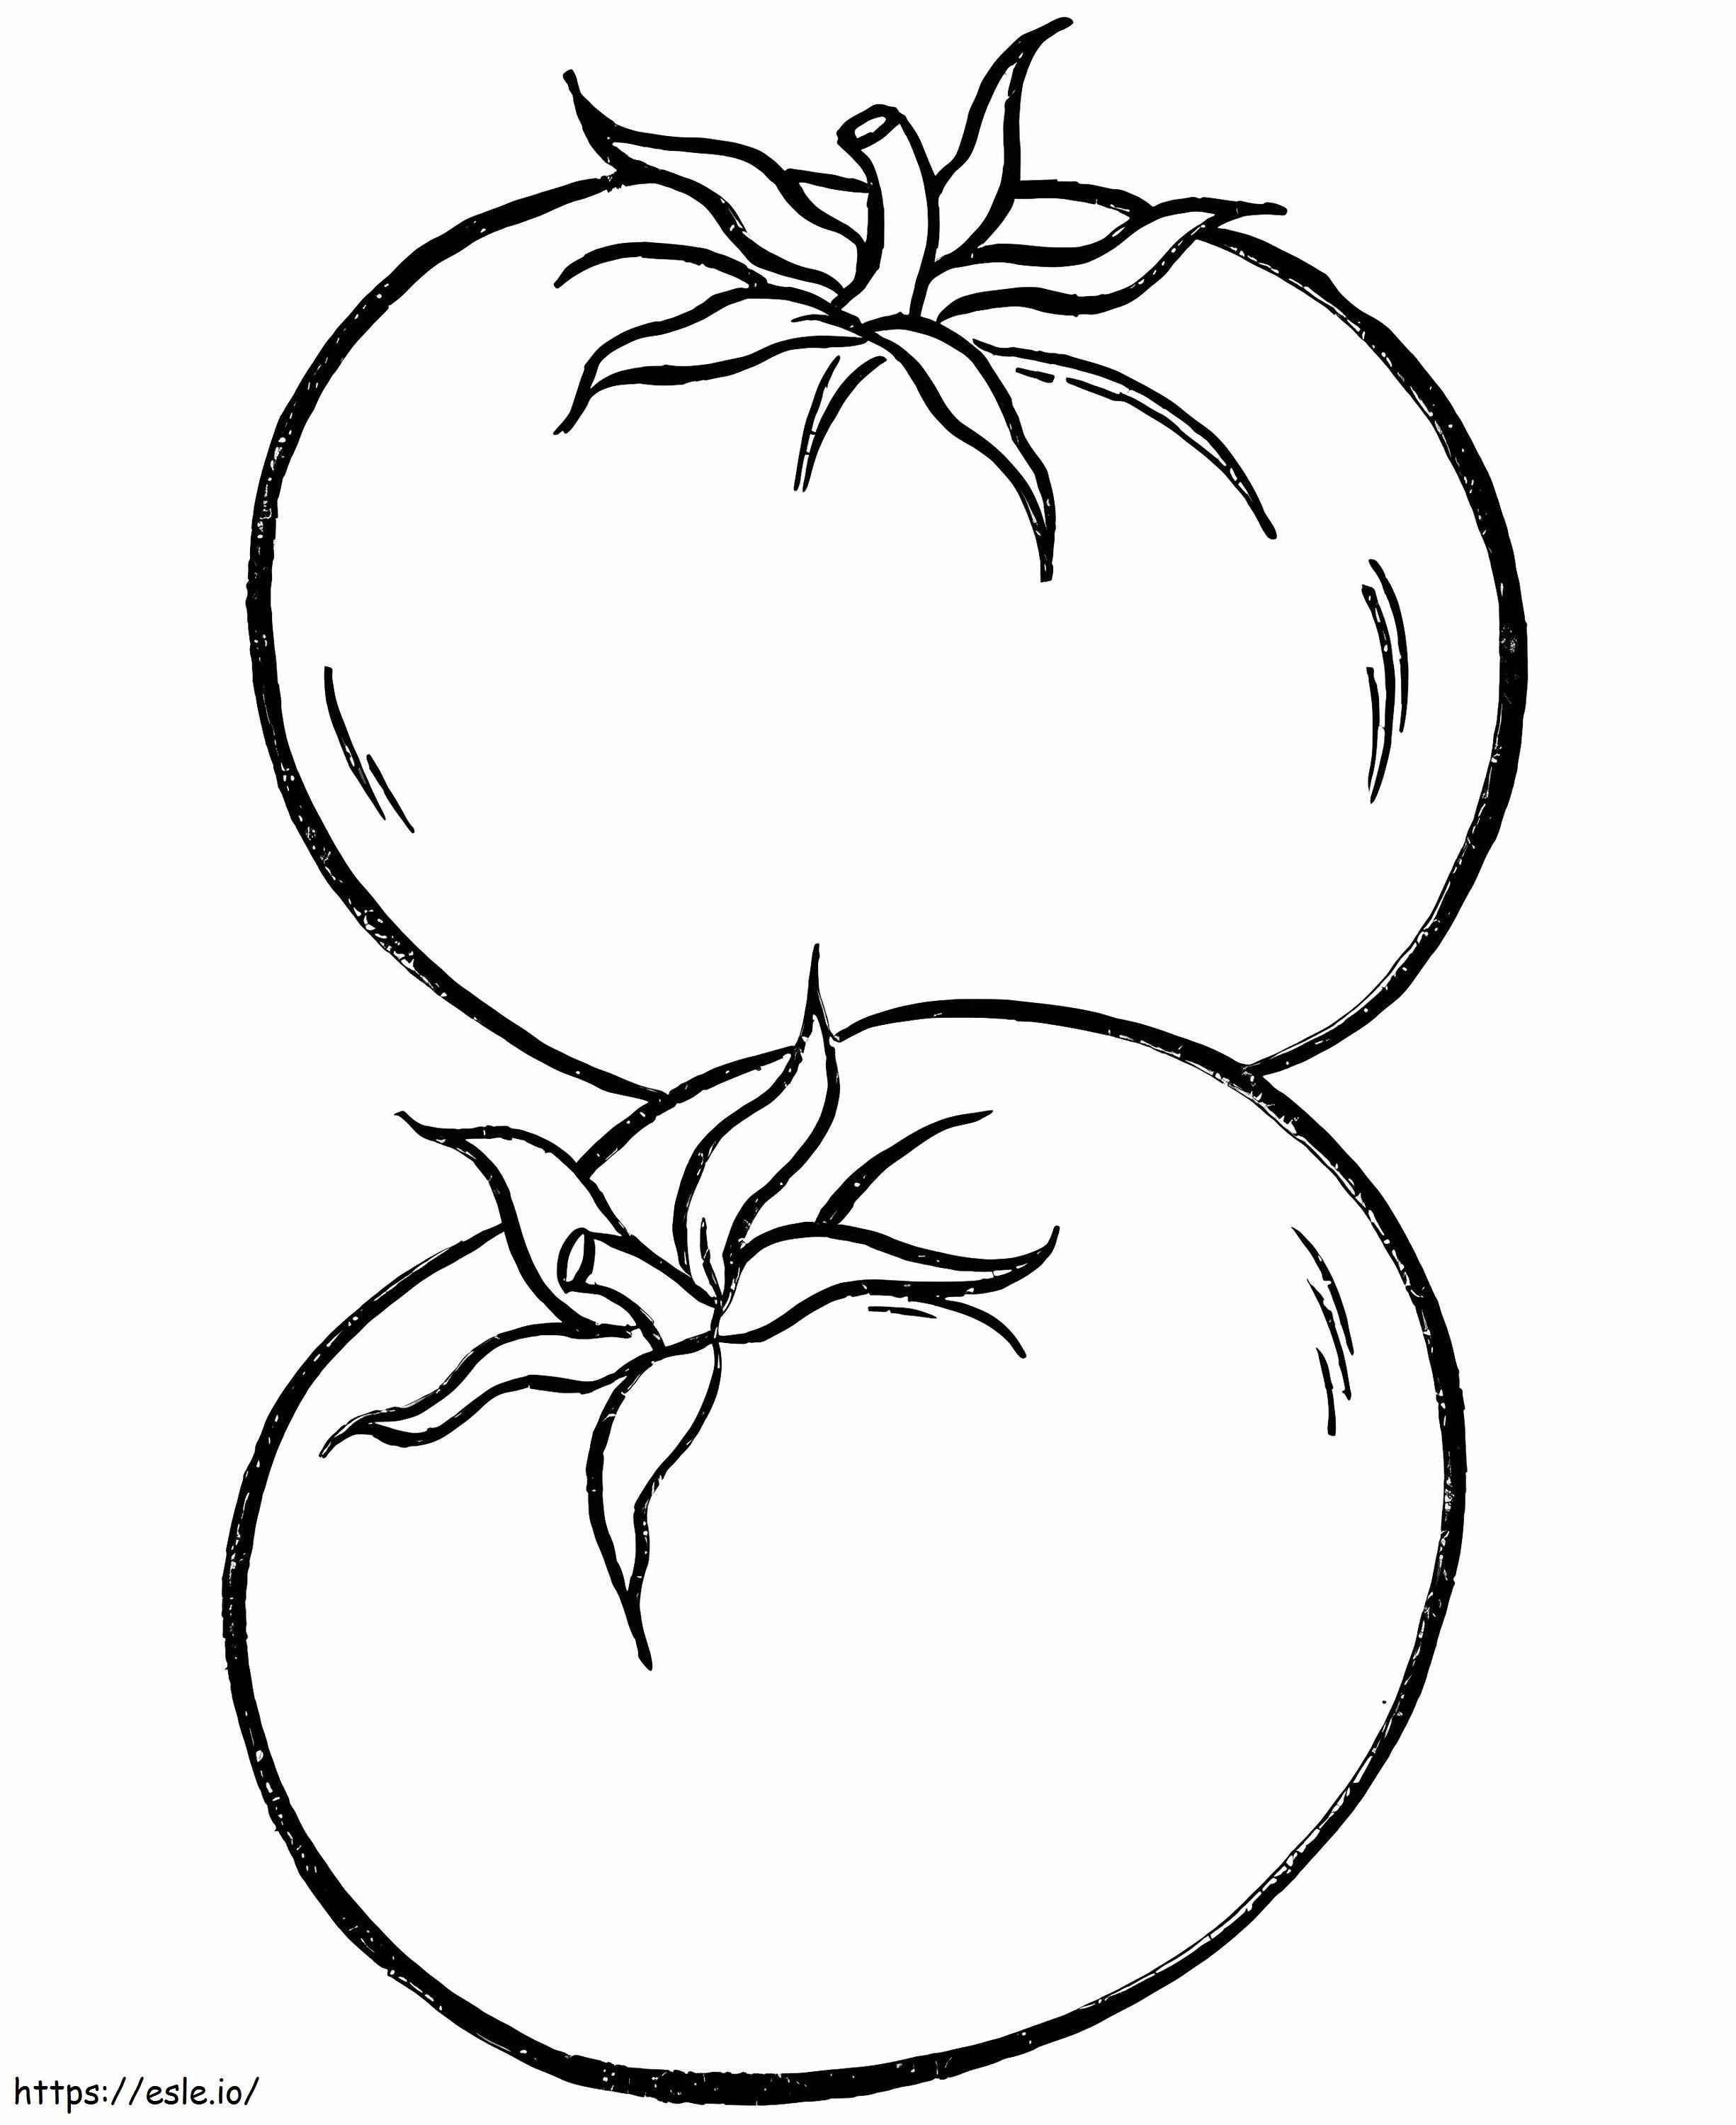 Two Tomatoes coloring page